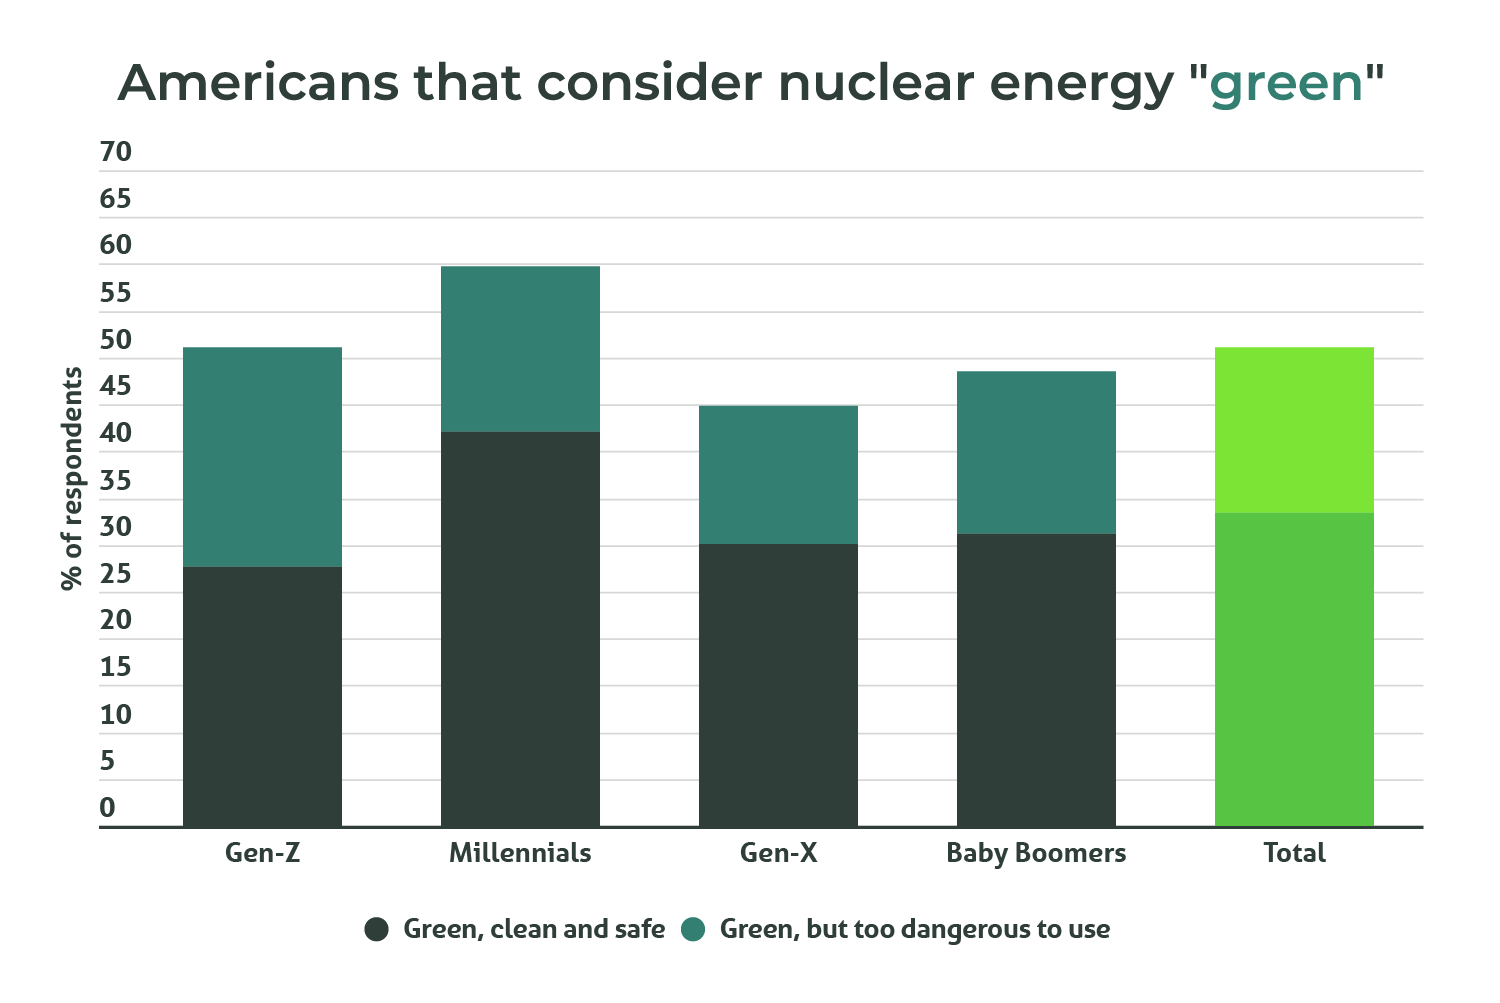 A column graph showing what percentage of Americans consider nuclear energy "green" by age group